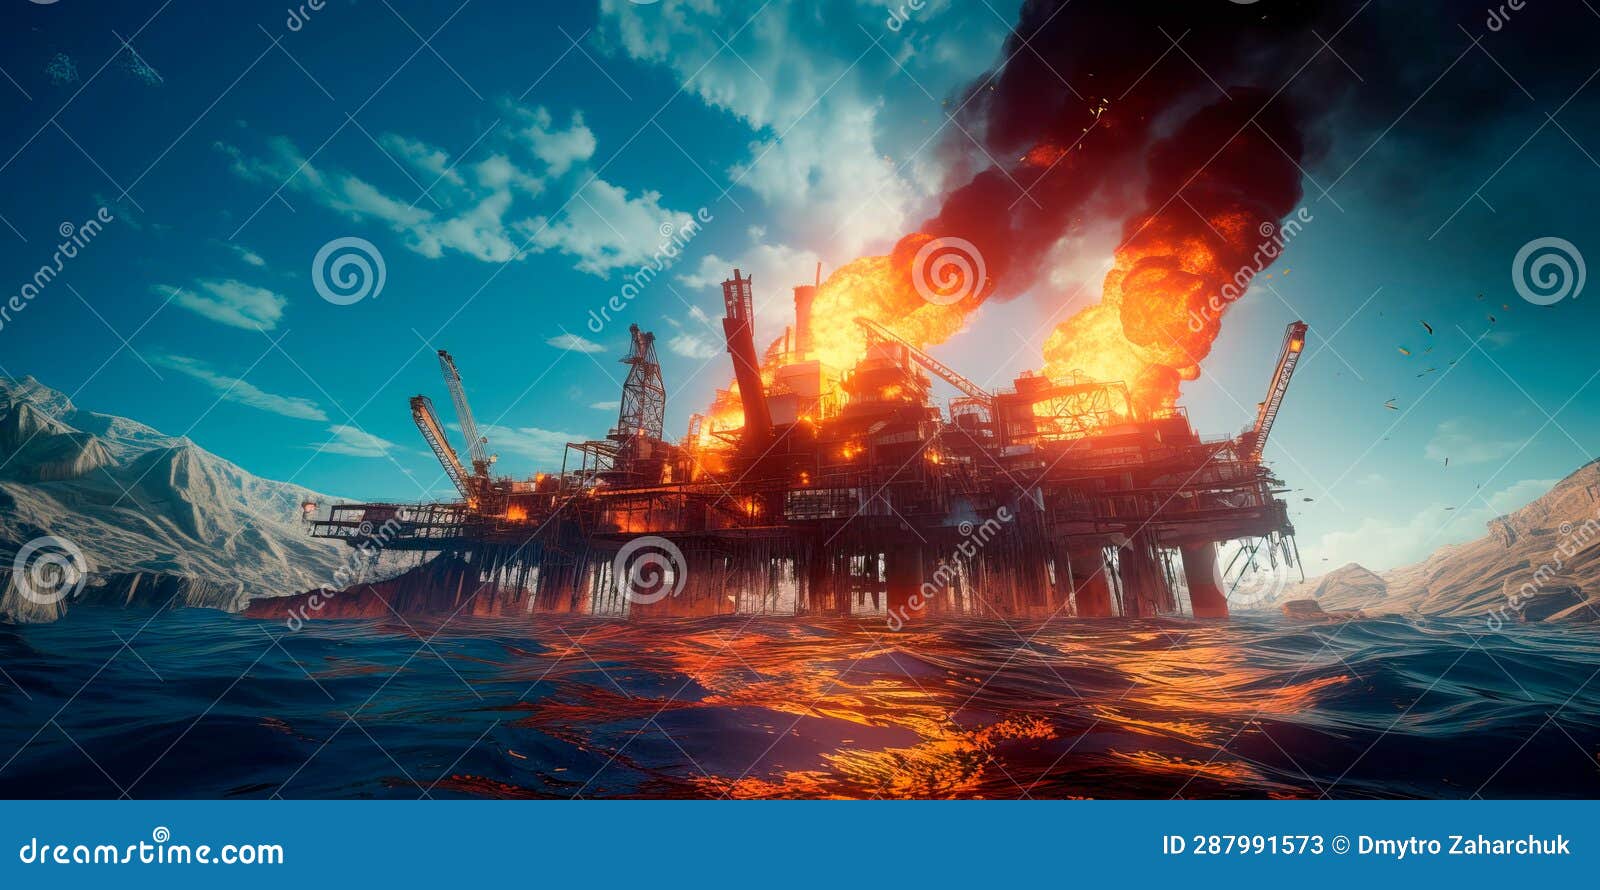 an oil rig disaster at sea, with oil slicks spreading across the ocean surface and threatening marine life. generative